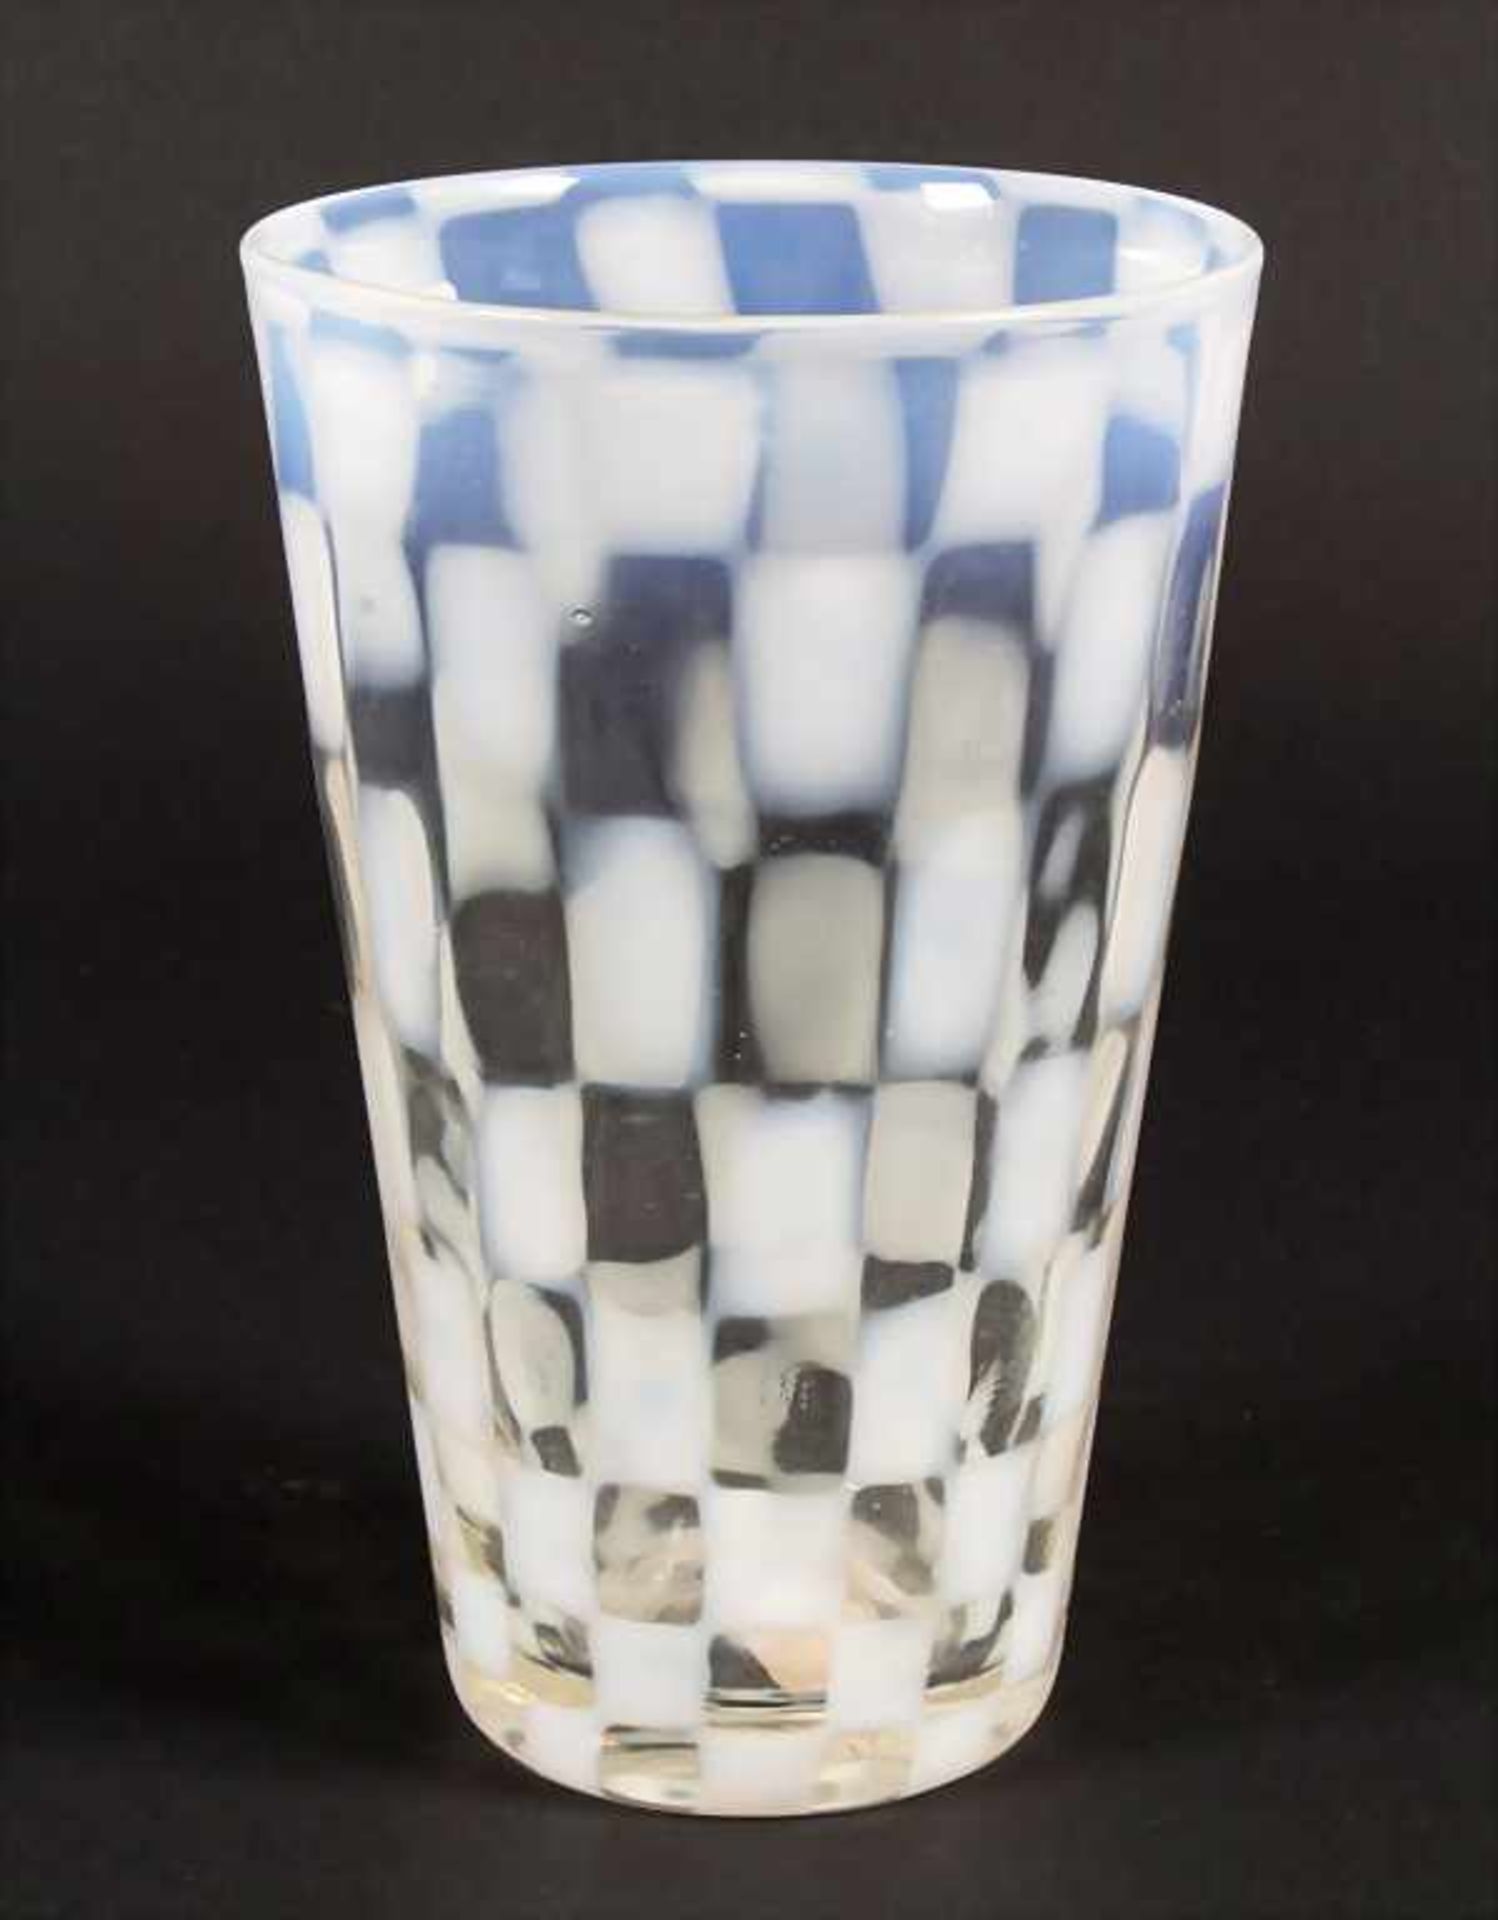 Glasziervase / A decorative glass vase, wohl Brovier & Toso, Murano - Image 2 of 4